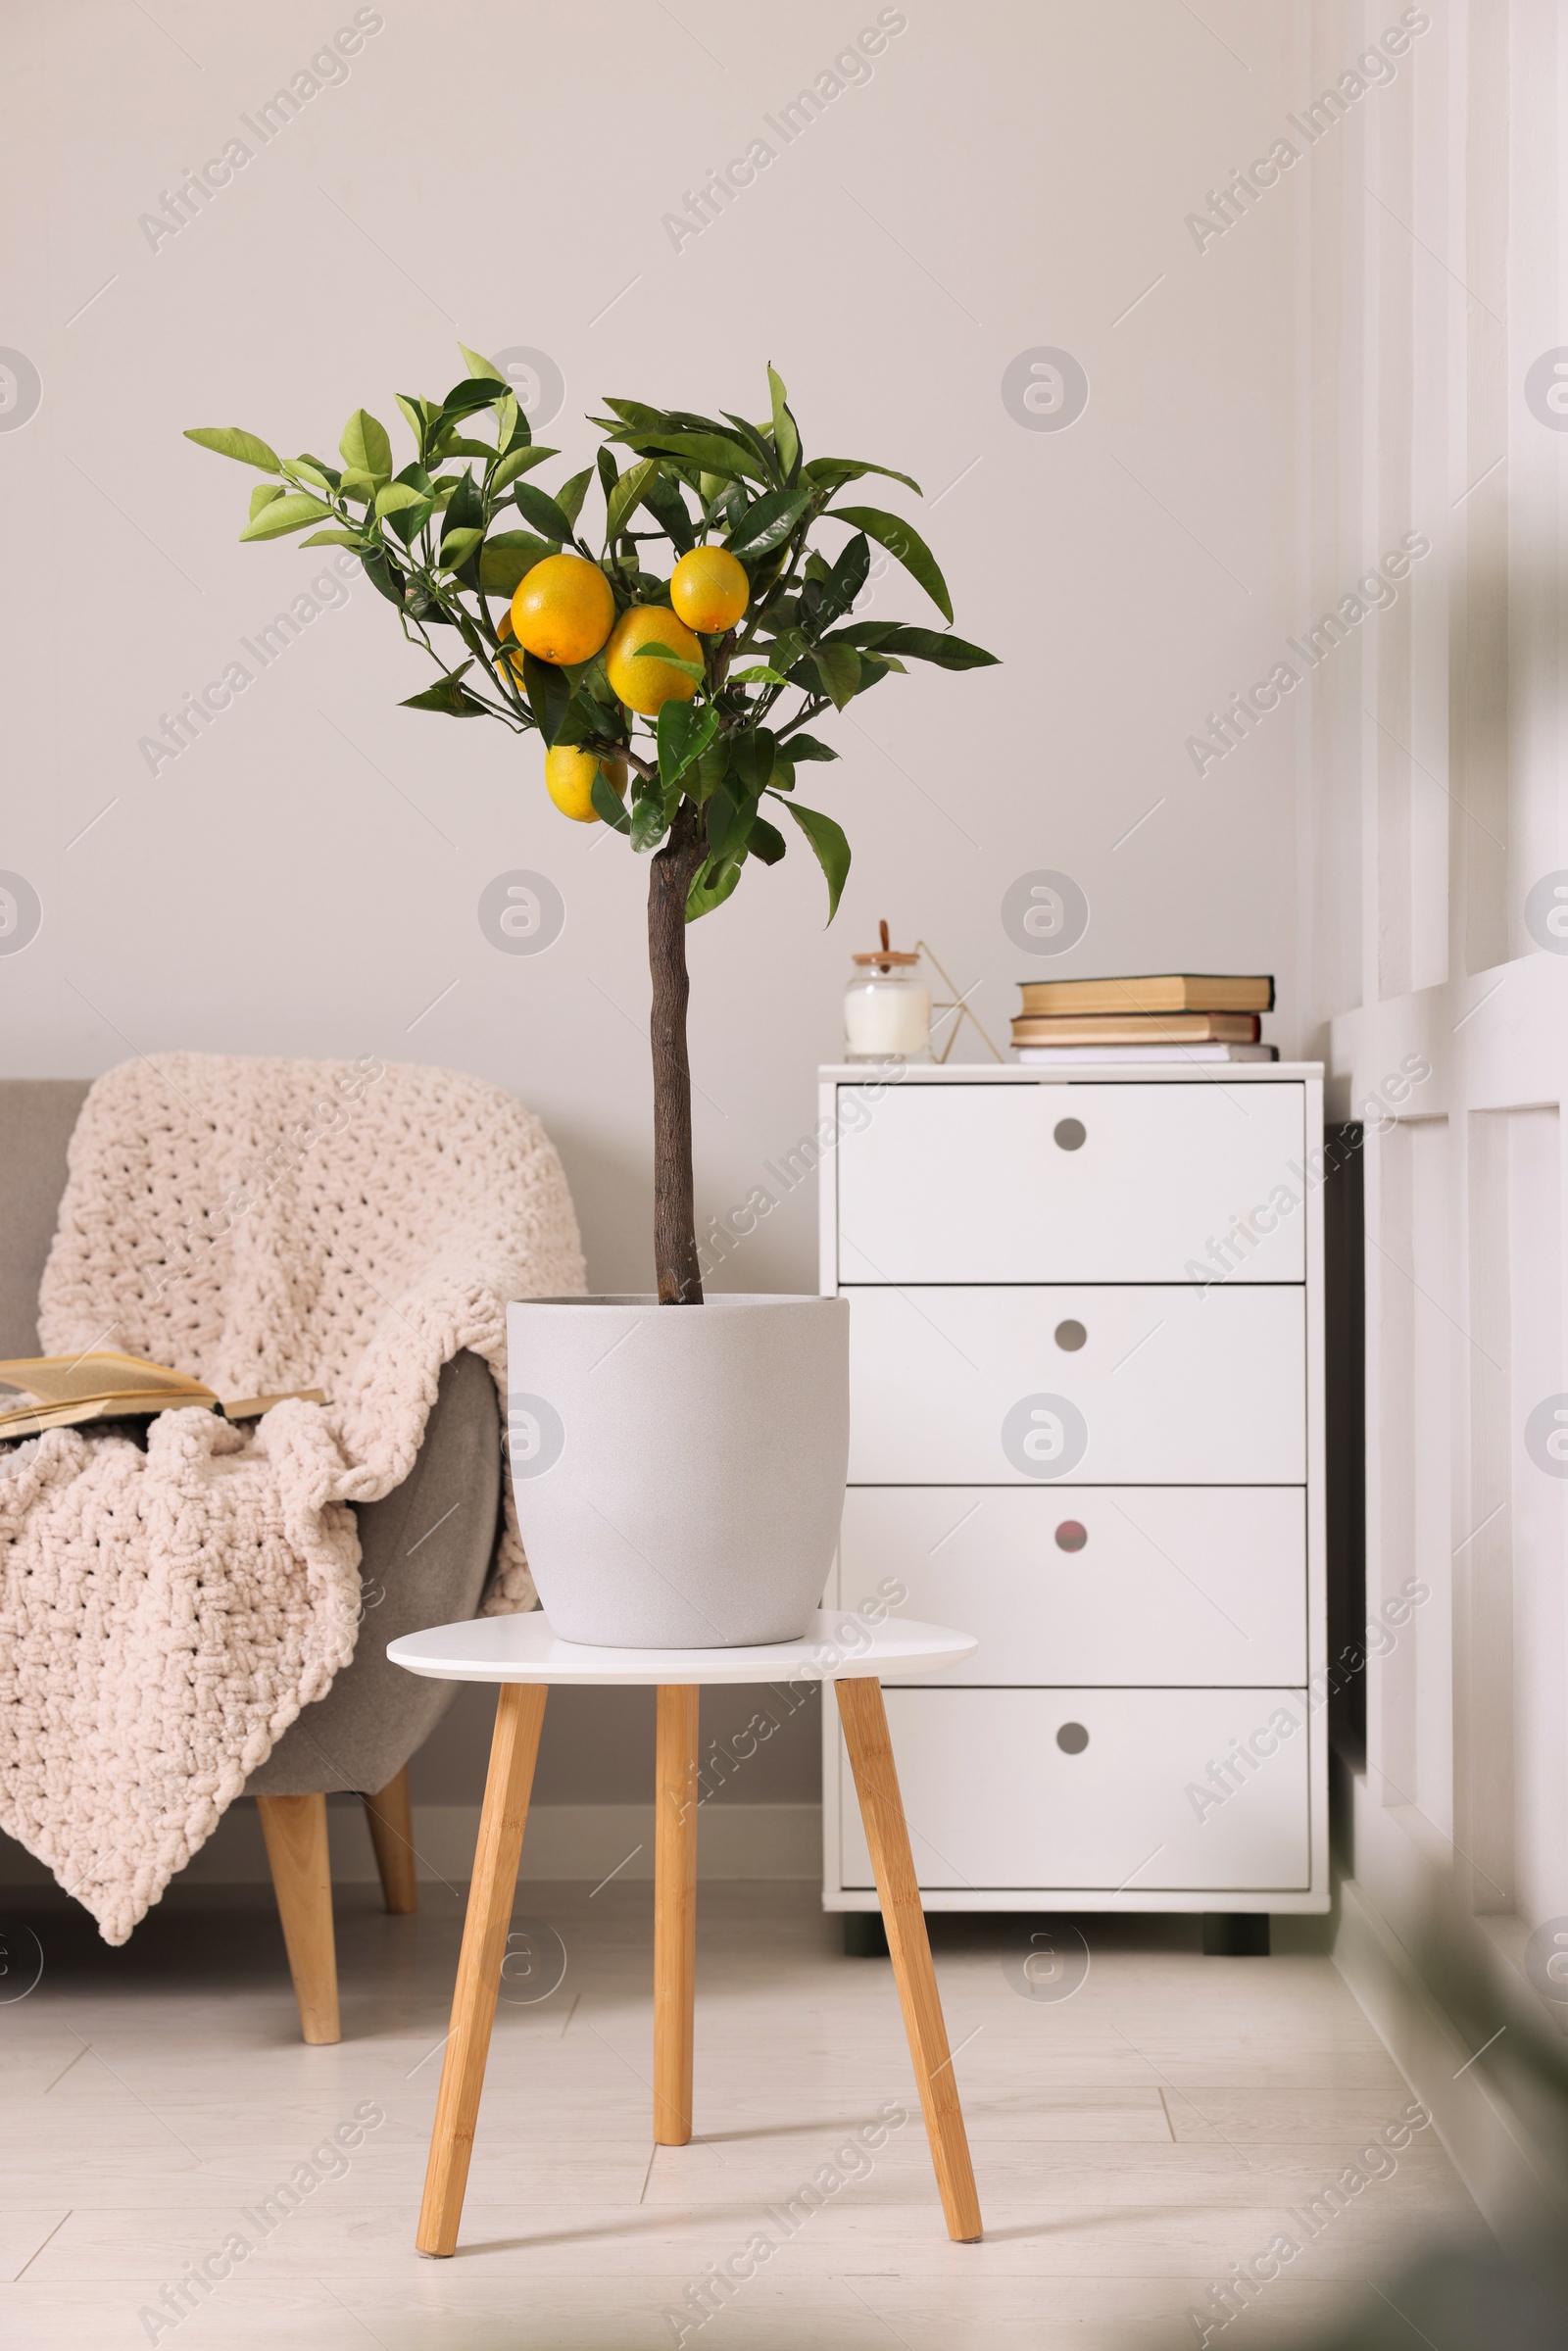 Photo of Idea for minimalist interior design. Small potted lemon tree with fruits on table in living room